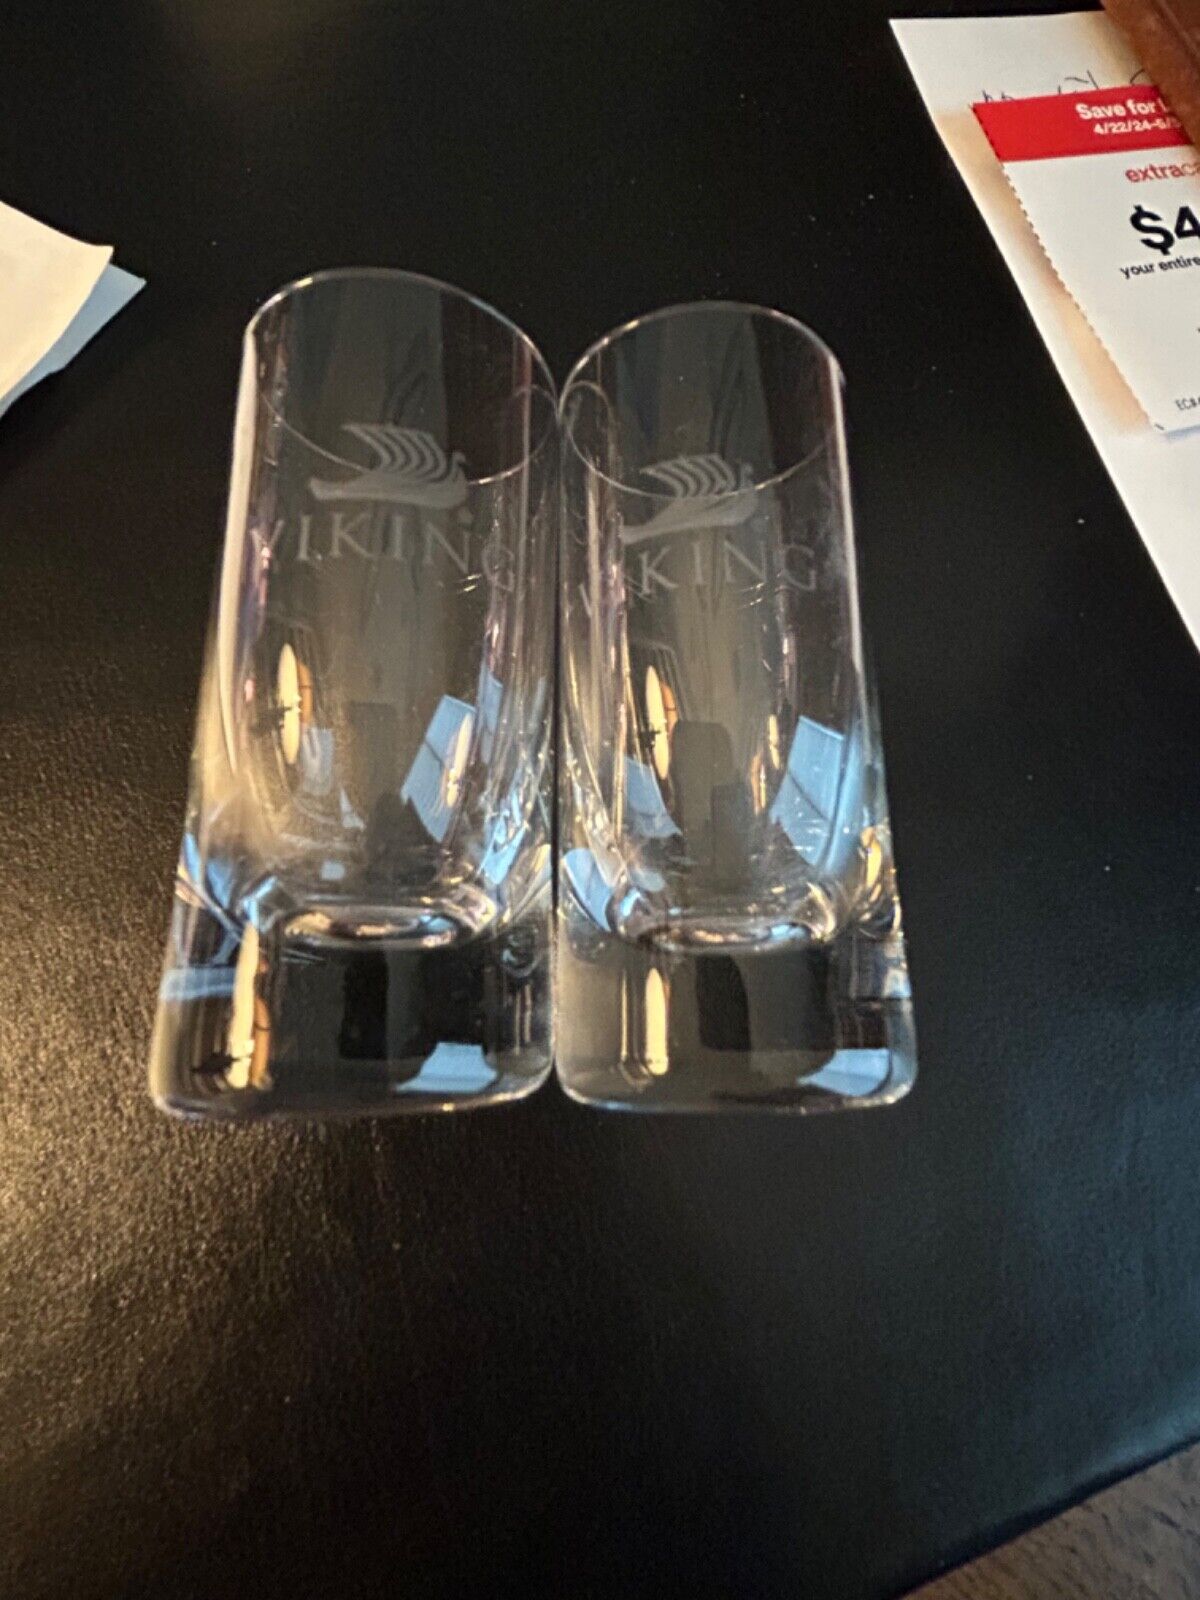 TWO (2) VIKING River Cruise Lines, Etched Shot Glasses 3.25” Tall/1.5” Wide New